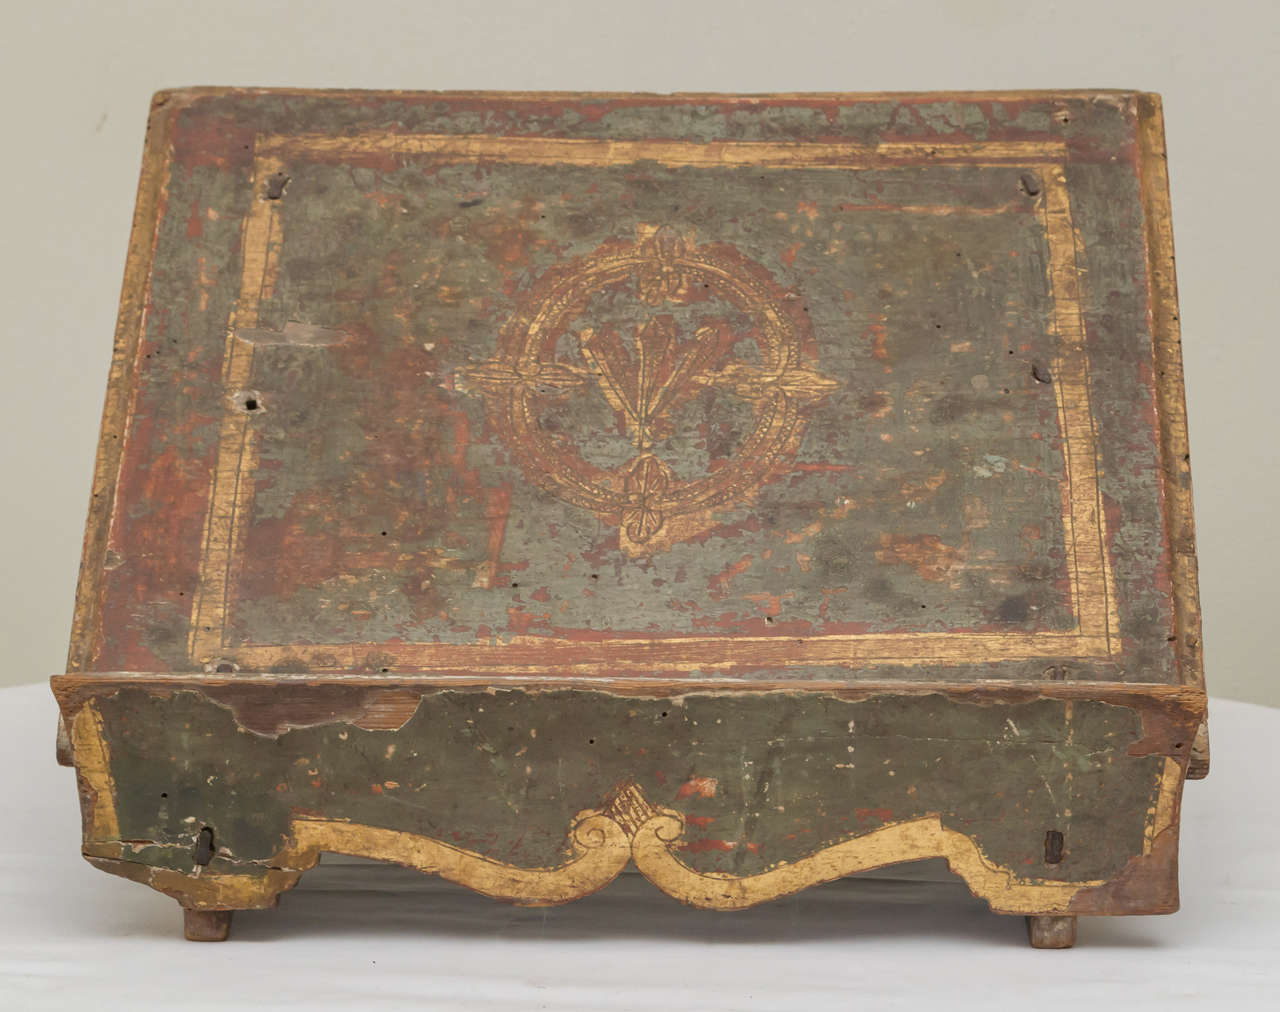 18th century. Italian book slant/holder. Retains a distressed old green paint and gilt finish. Good aged crackle. Unrestored.